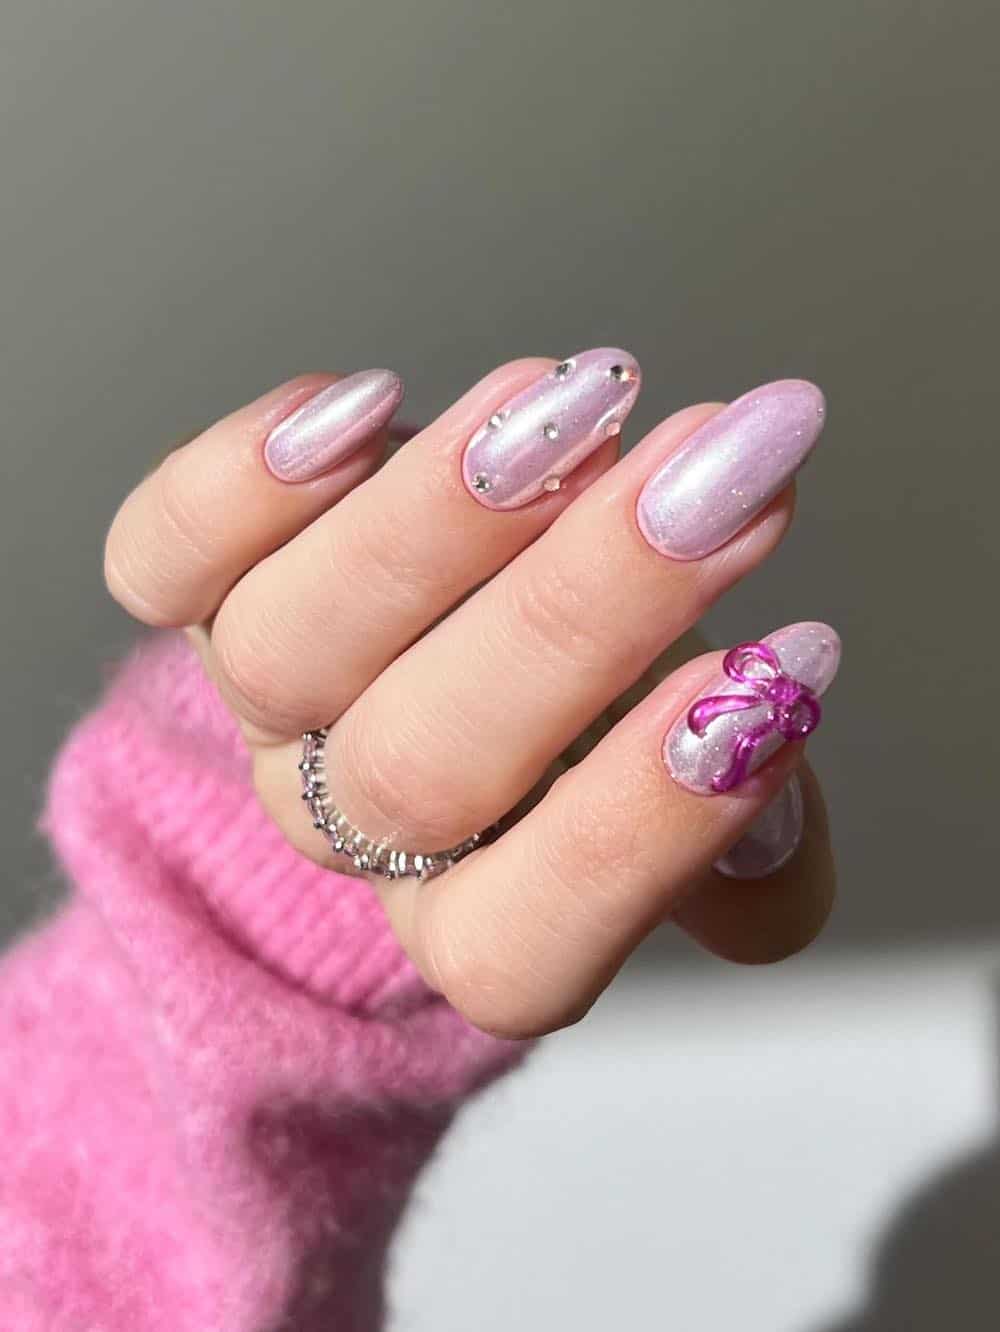 A hand with short almond nails painted a shimmering pink with gem accents and bright pink bow details